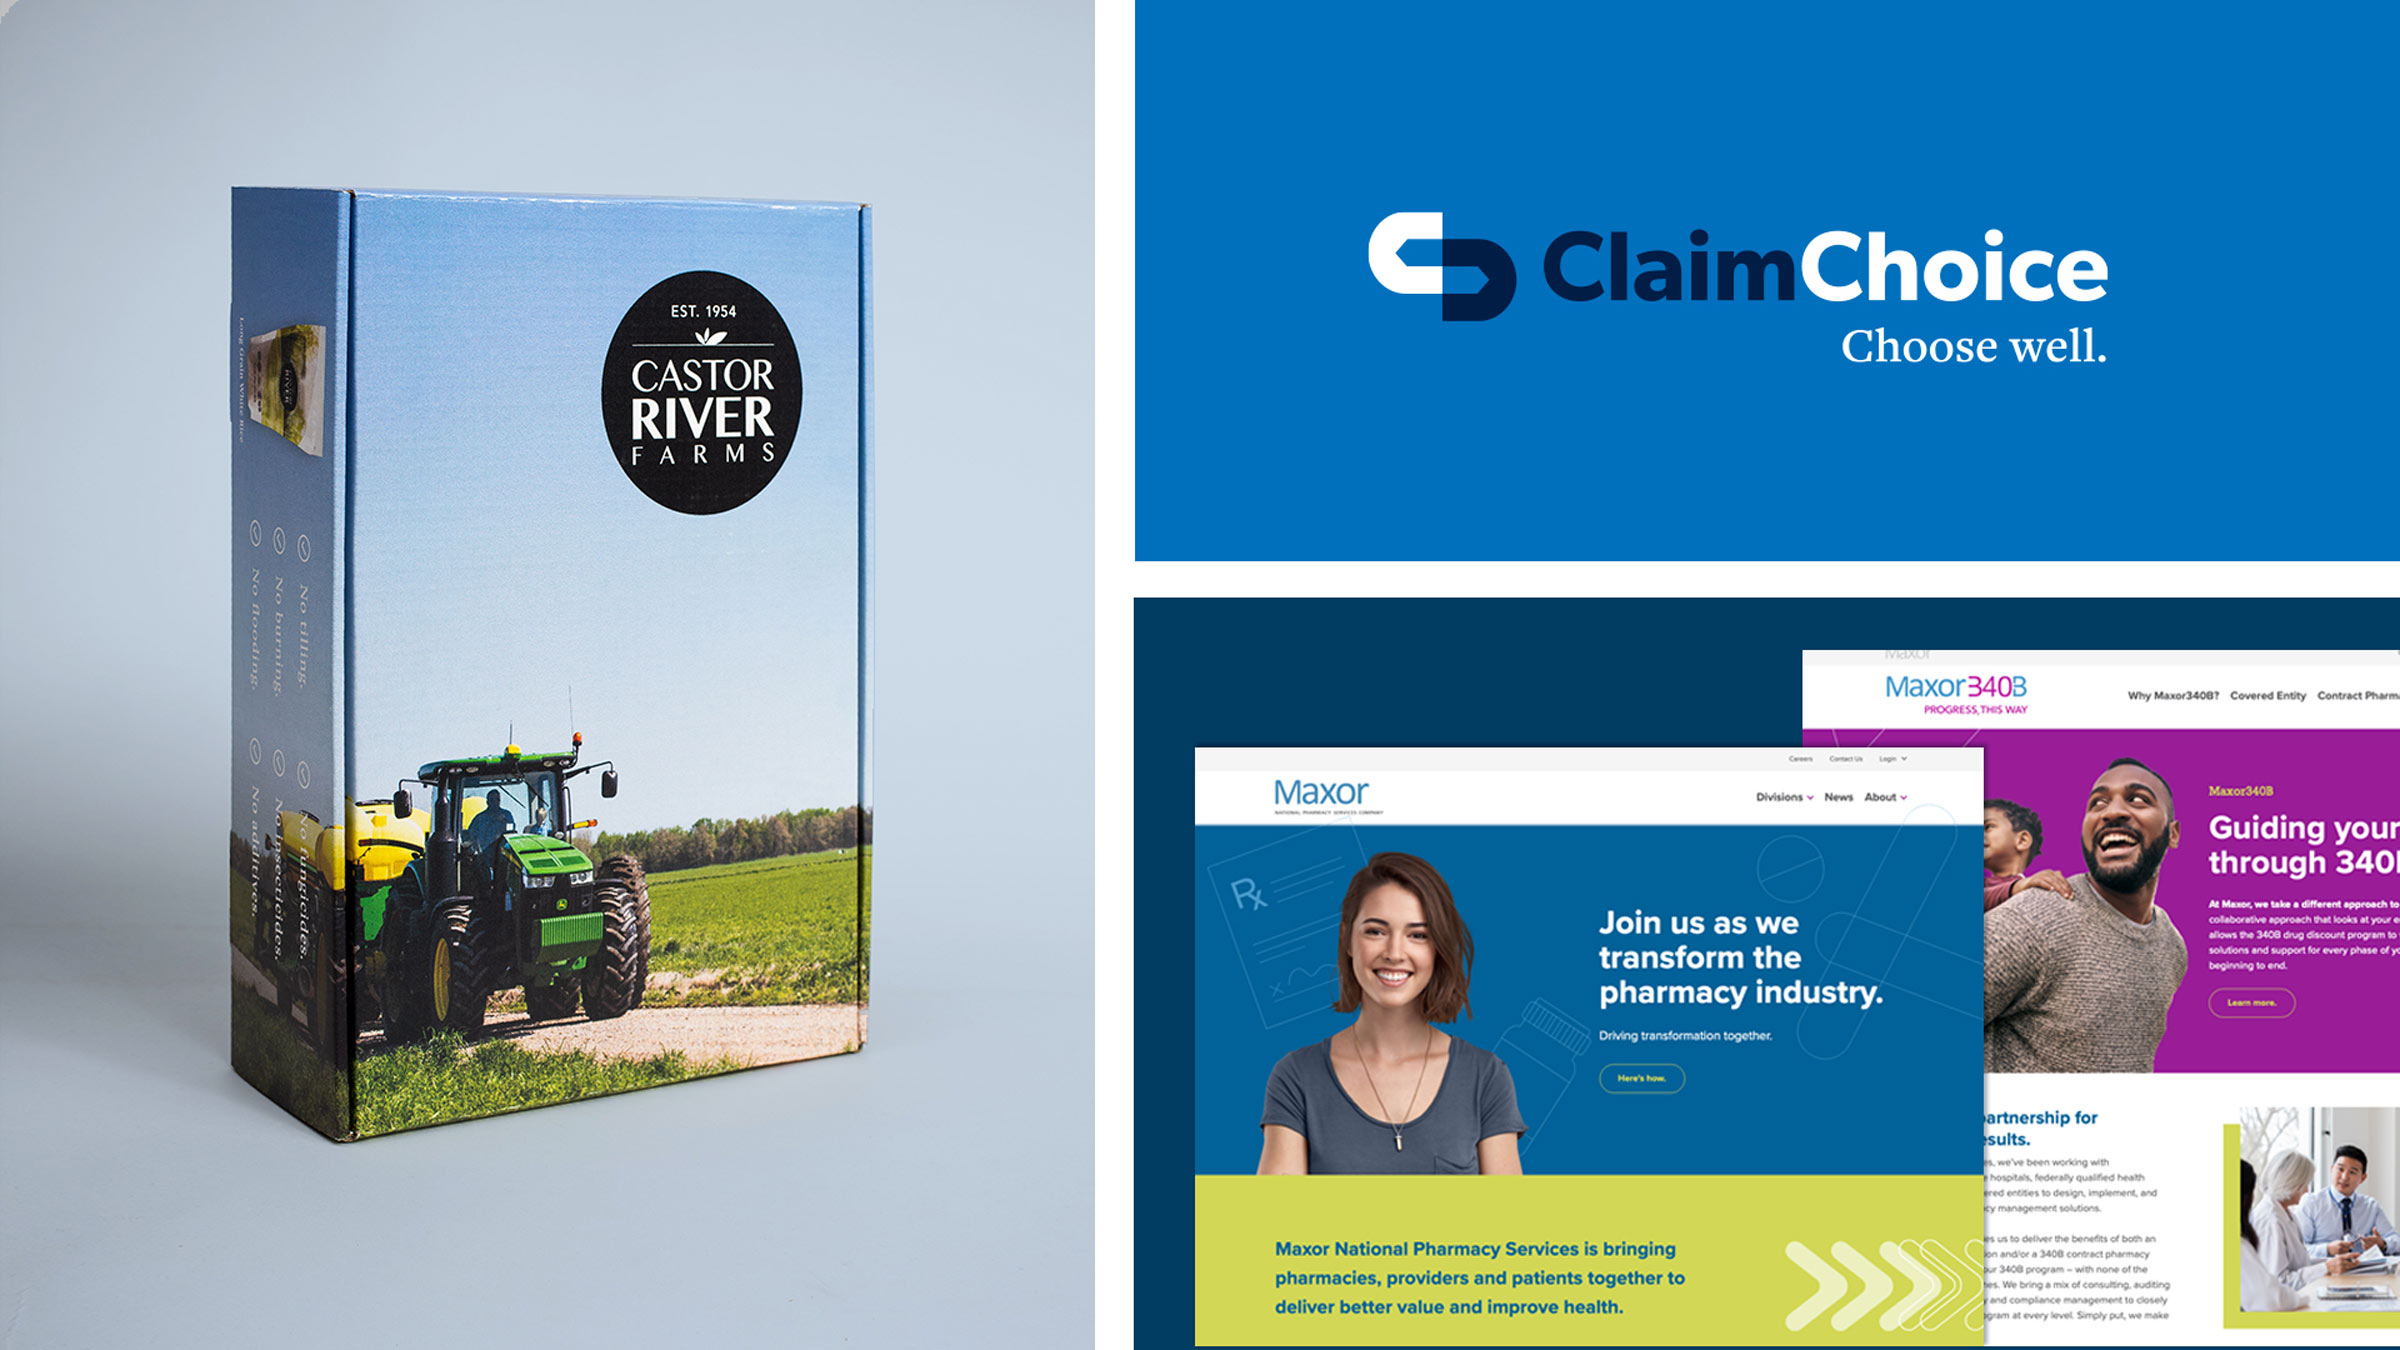 Atomicdust's branding and marketing work for Castor River Farms, ClaimChoice and Maxor earned 2020 GDUSA Health + Wellness Design Awards